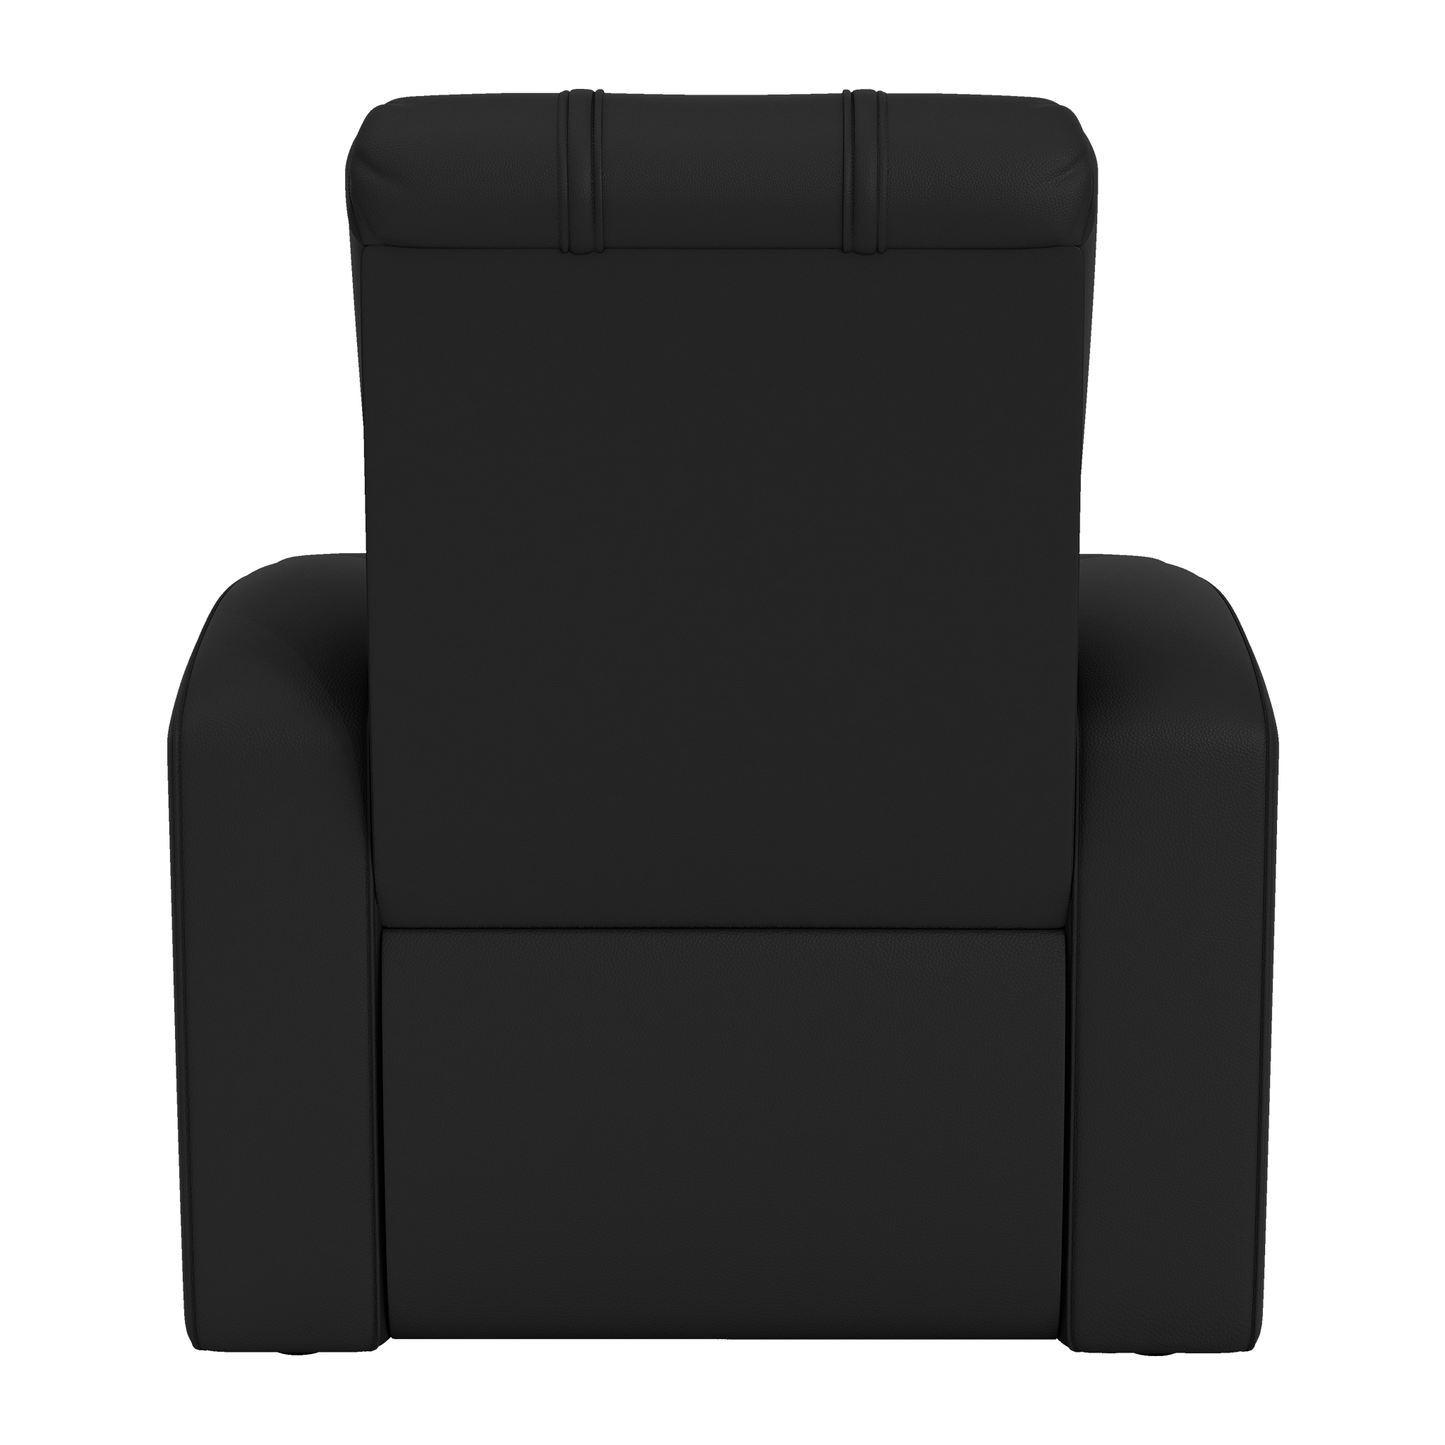 Relax Home Theater Recliner with Austin FC Wordmark Logo